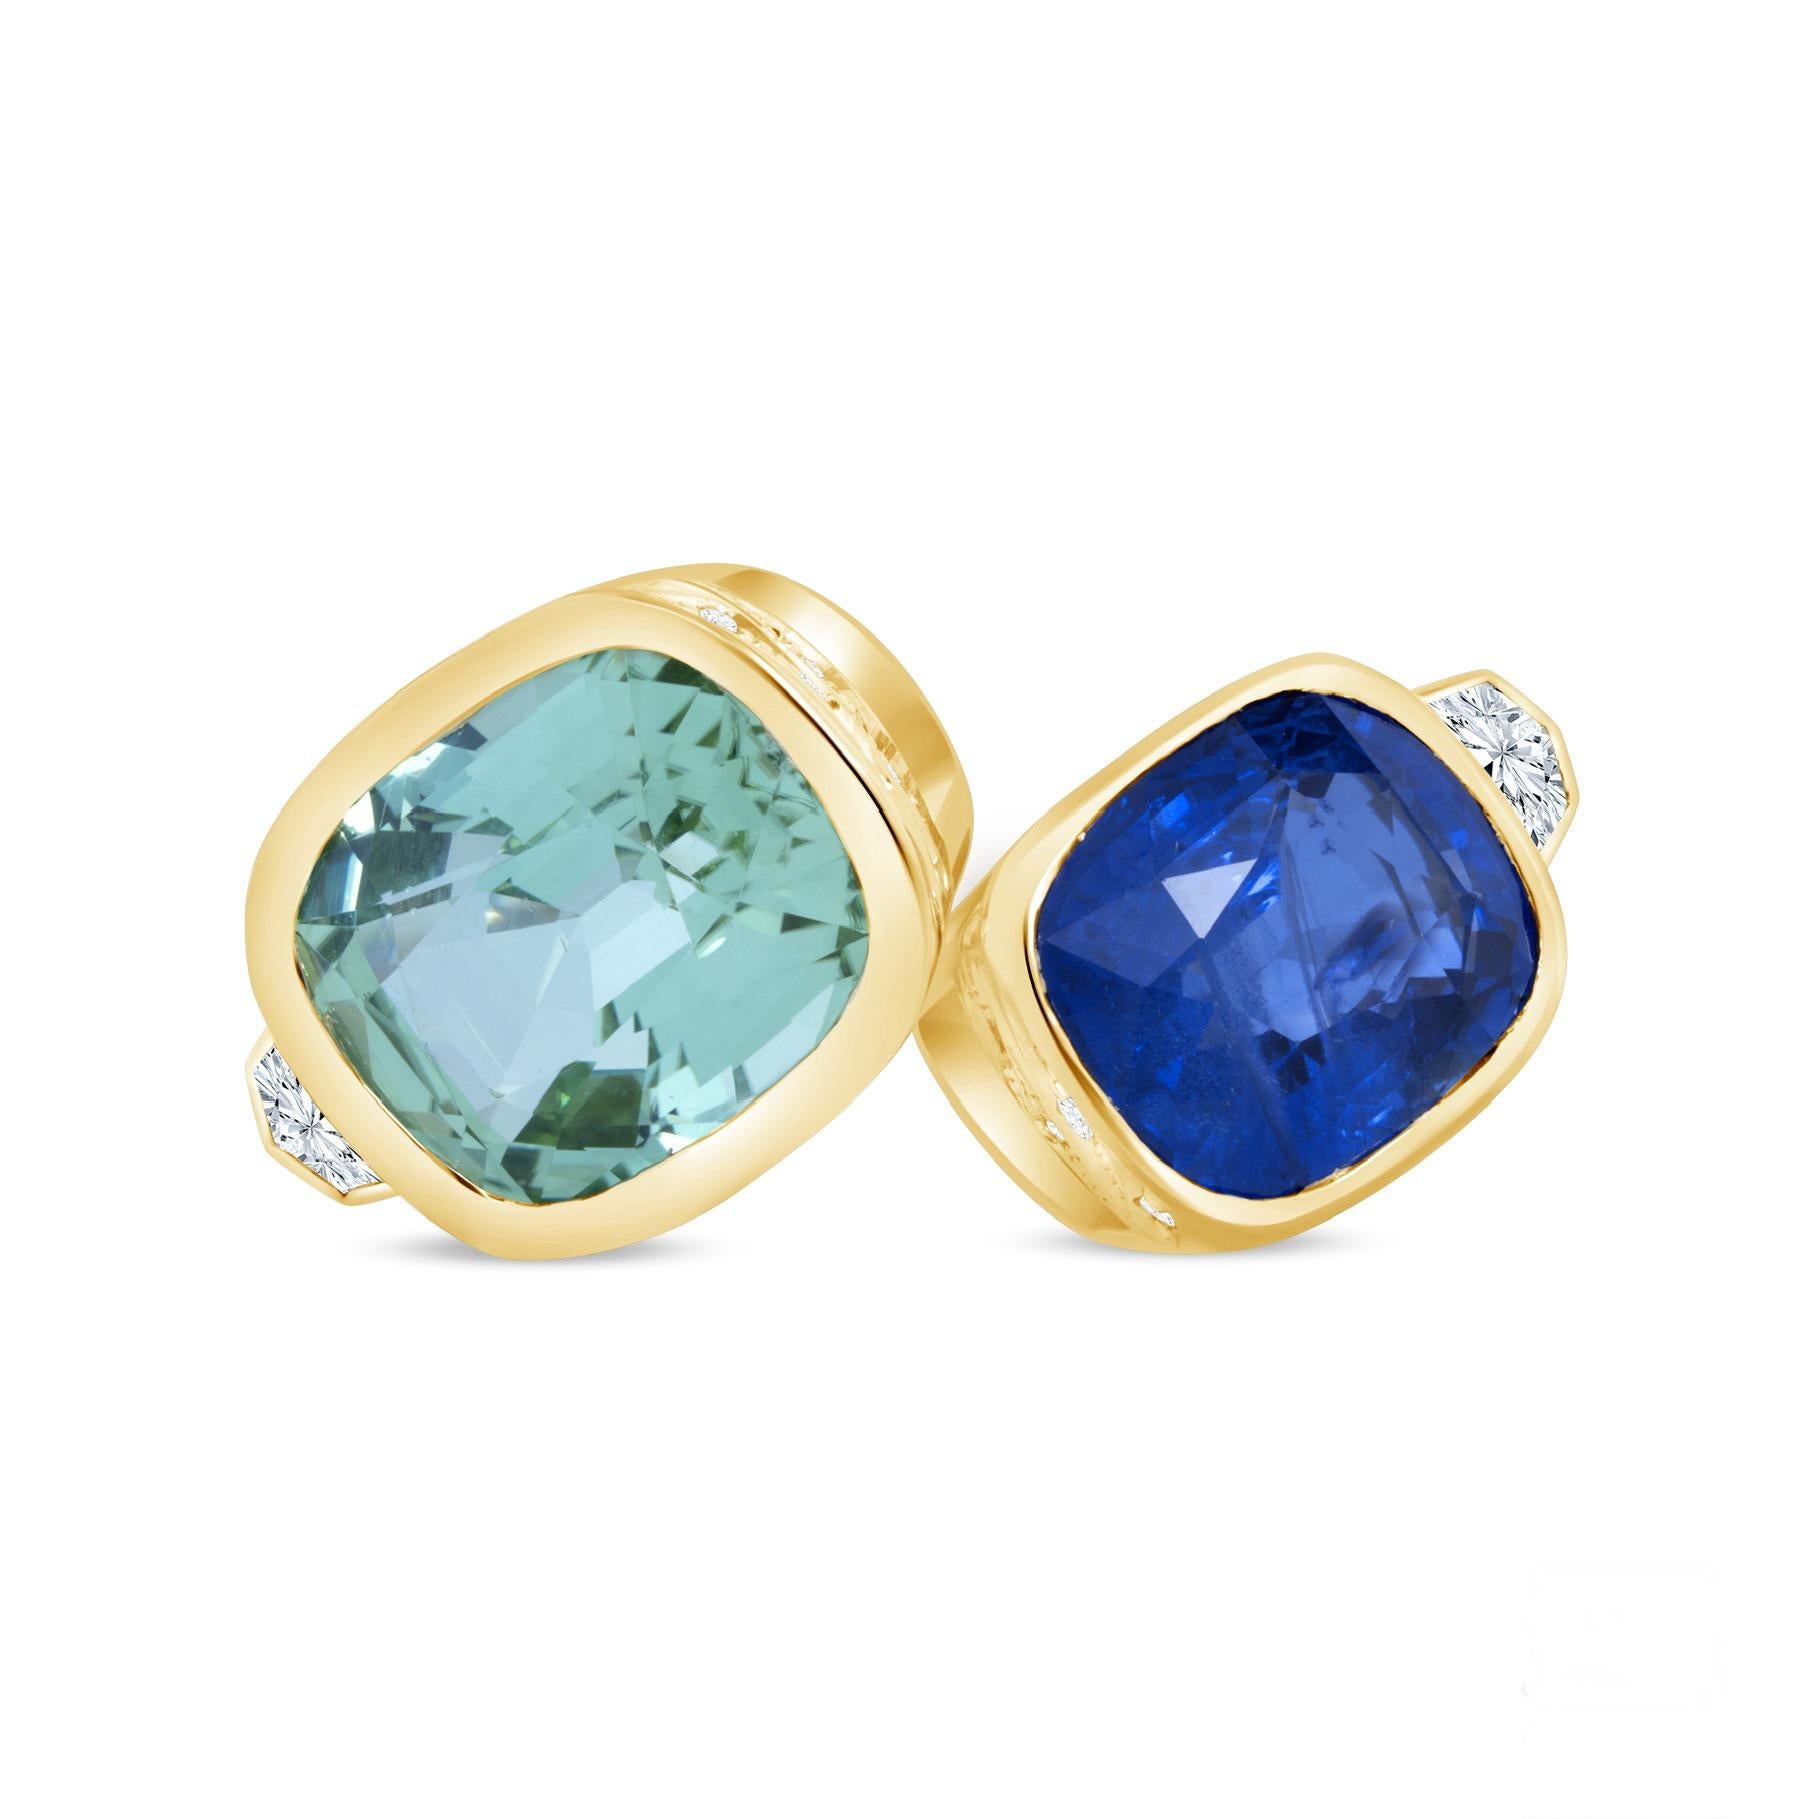 Modern 4.03ct Ceylon Sapphire and 5.07ct Afghan Tourmaline, cushion-cut bypass ring. For Sale